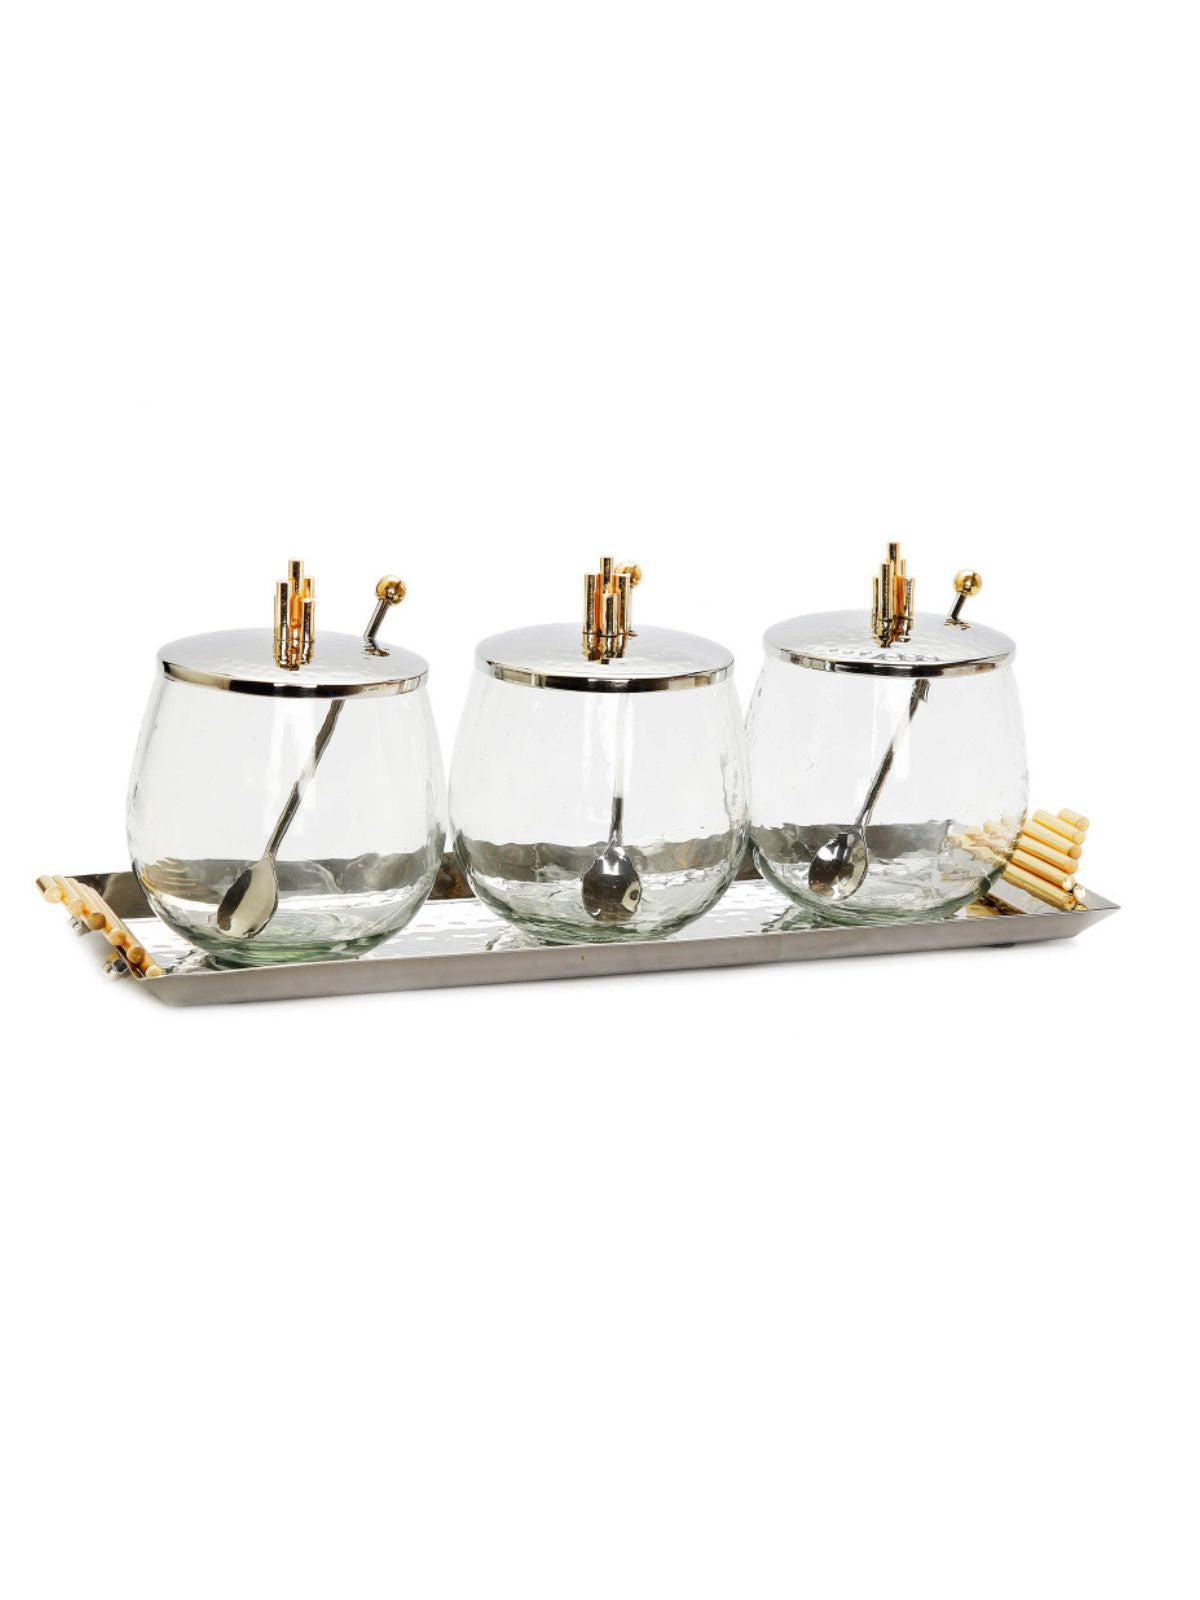 3 Glass Bowls and Spoons On Stainless Steel Tray With  With Gold Diamond Designed Handles - Front View